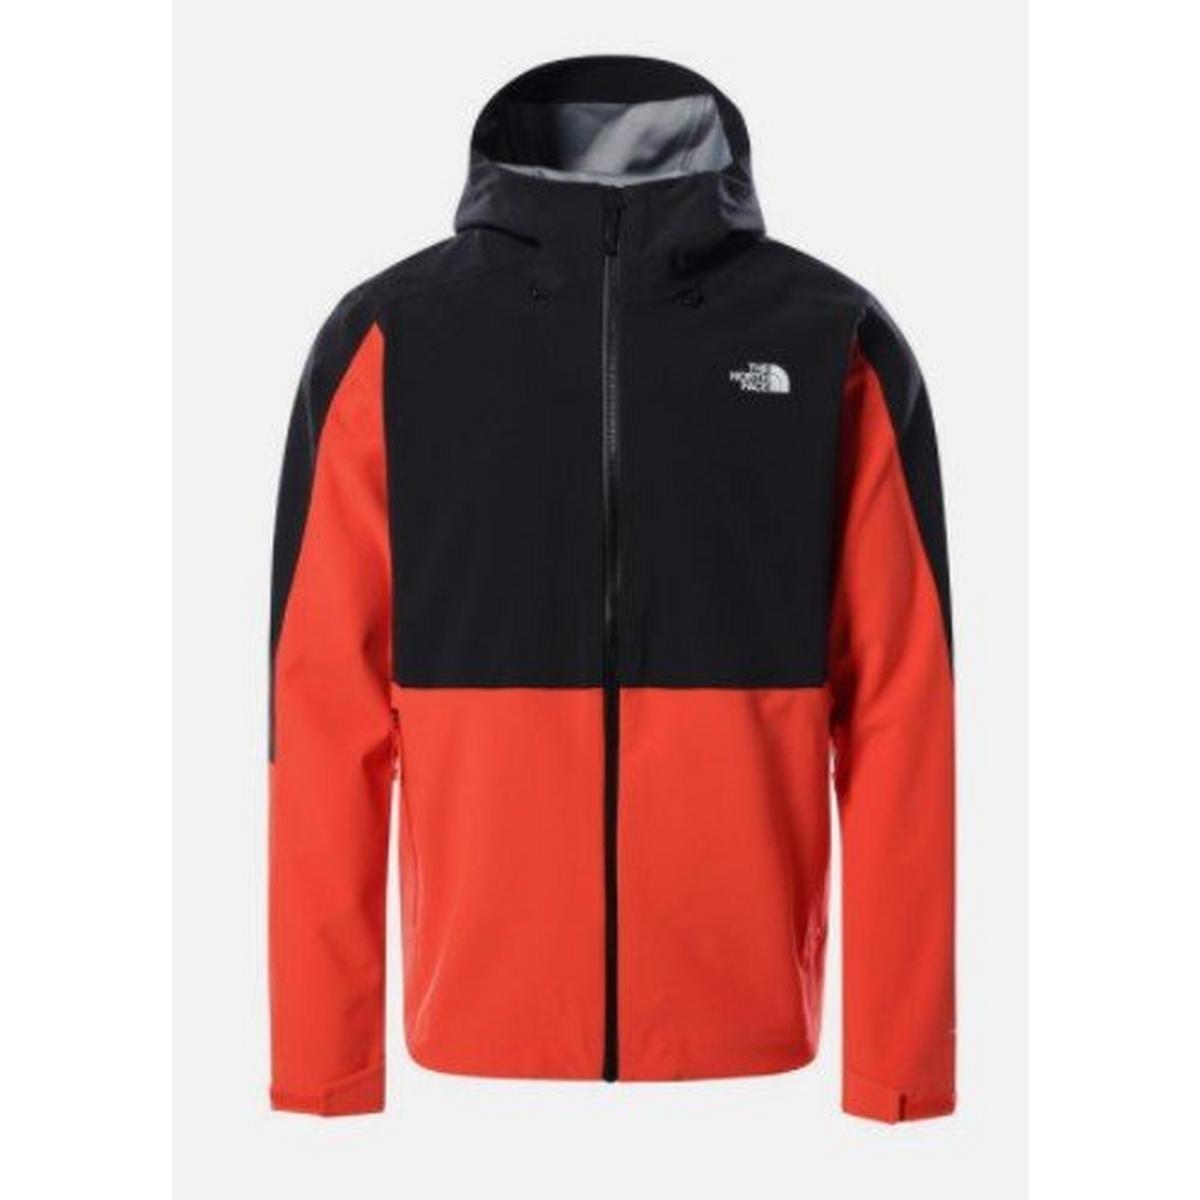 The North Face Men's Apex Flex Dryvent Jacket - Red